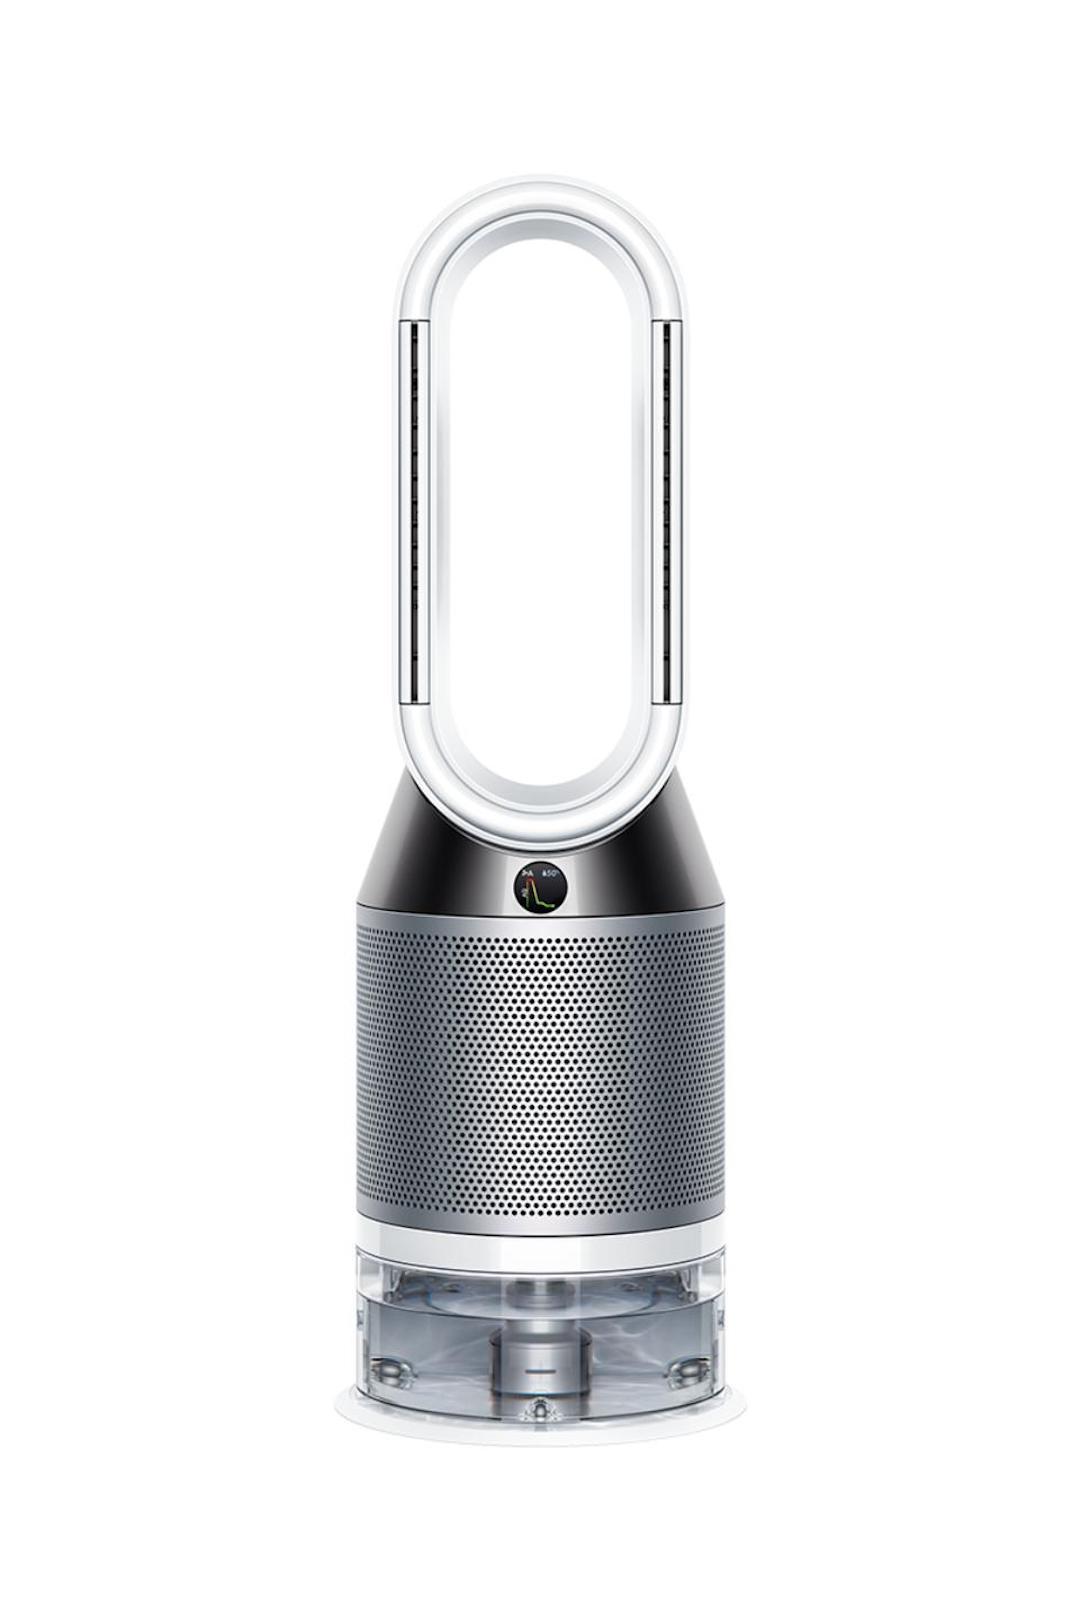 Dyson Pure Humidity + Cool 